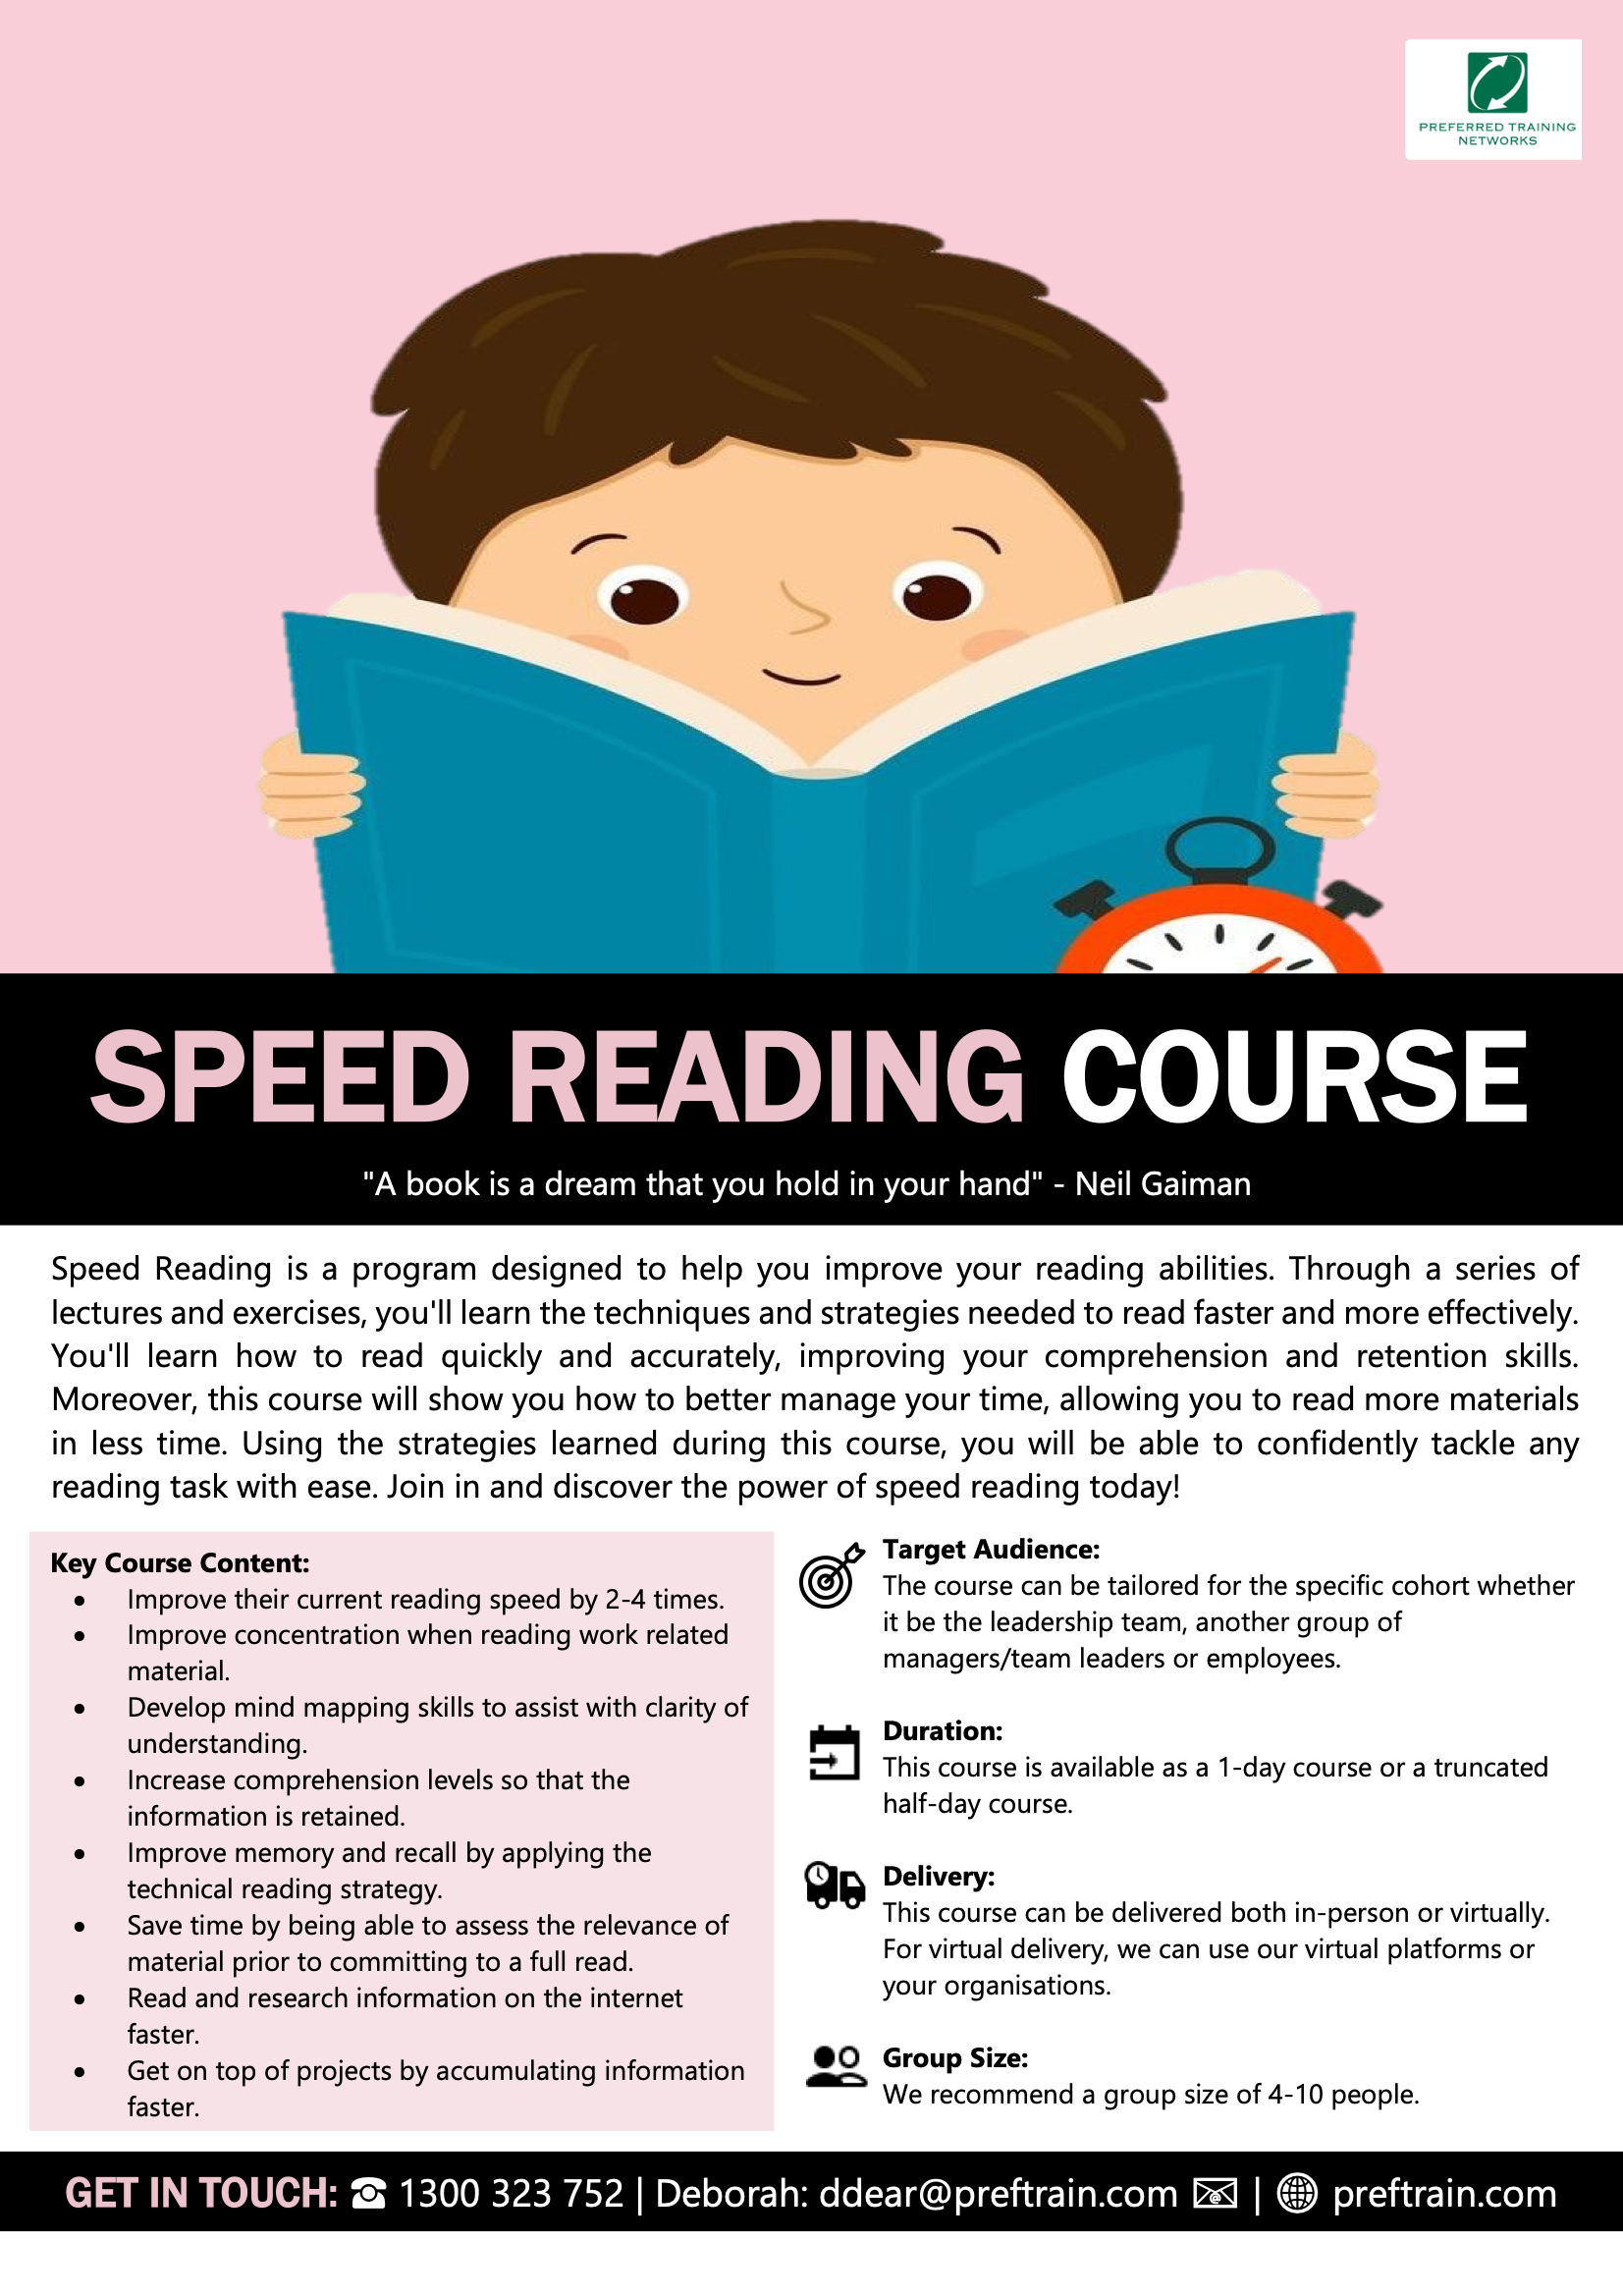 SPEED READING COURSE